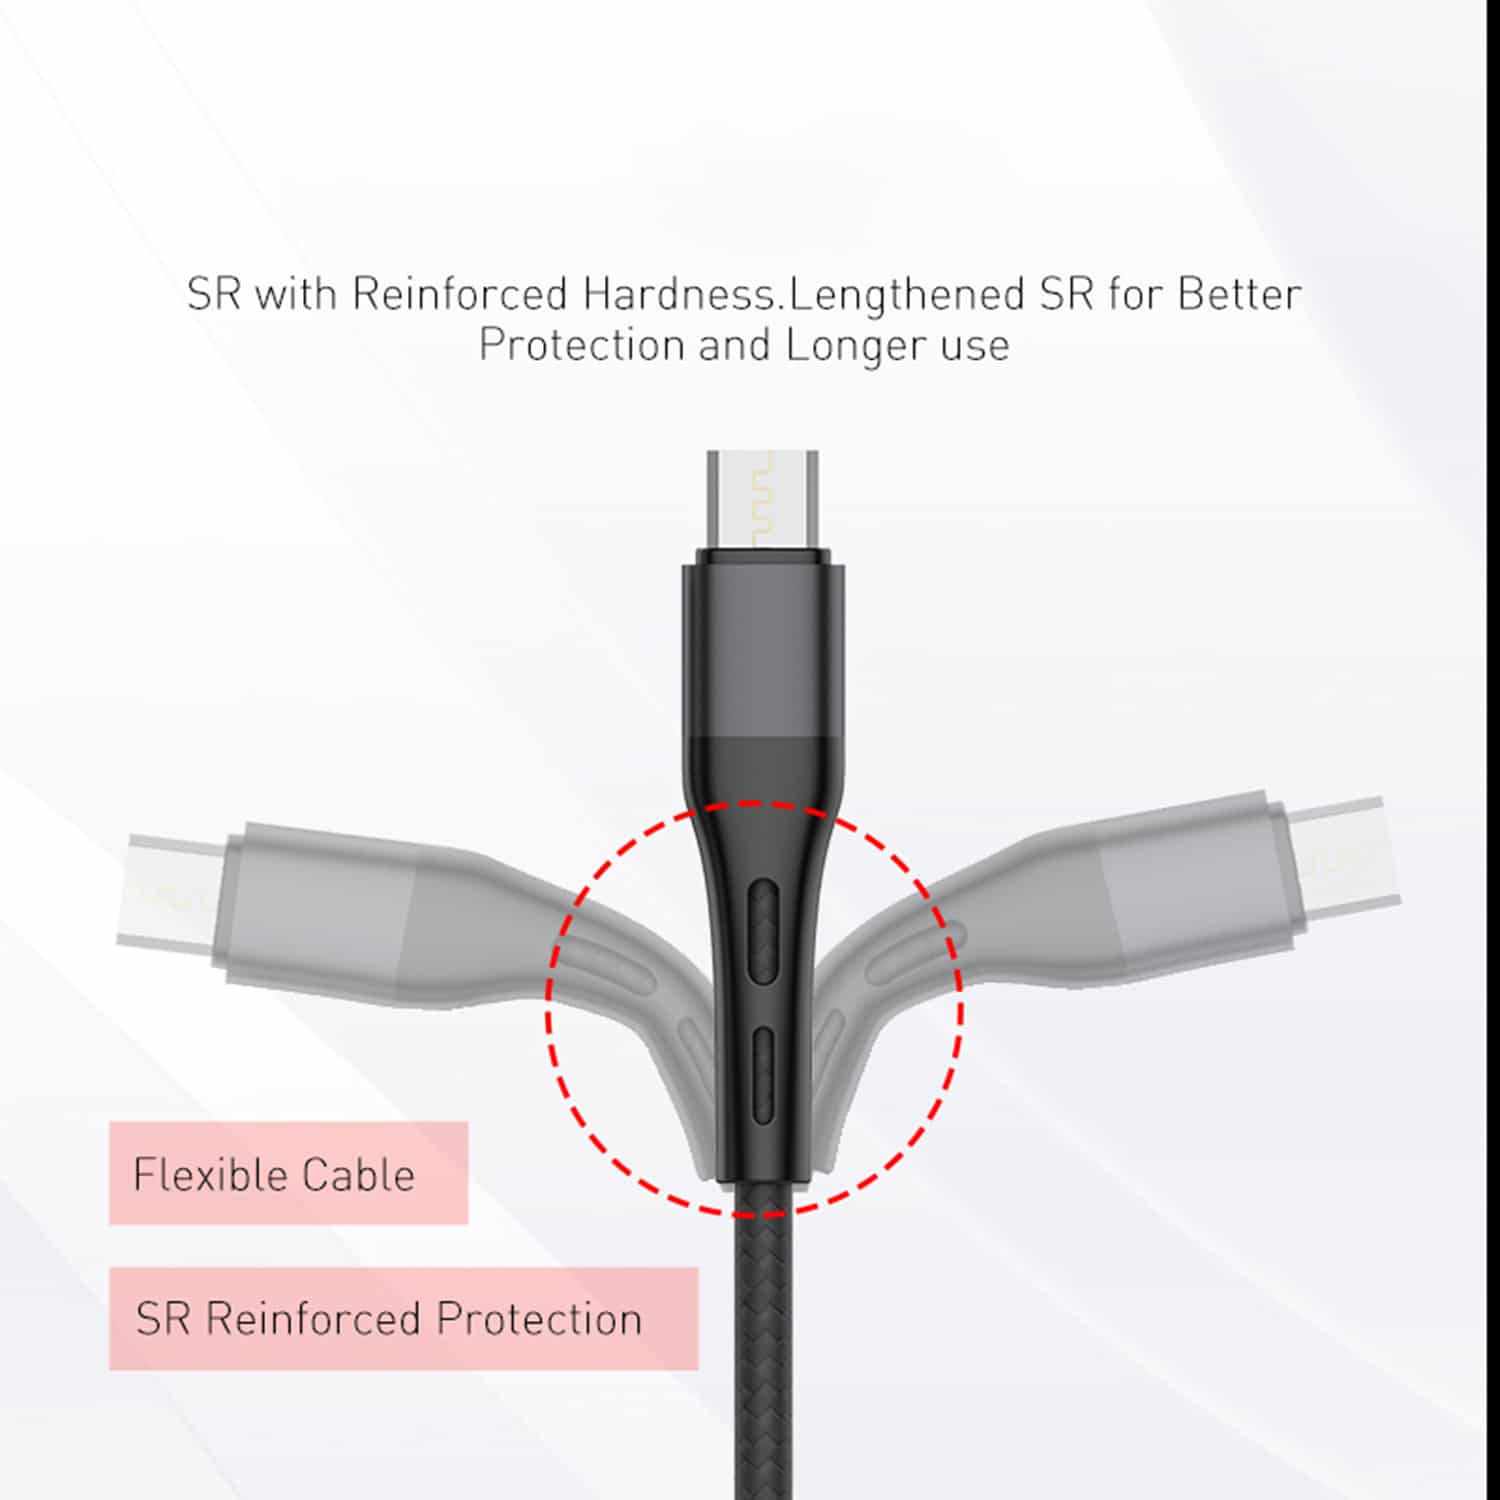 HAVIT HV-H6114 Double Blind Plug USB to Micro B Cable, Quick Charging, Black